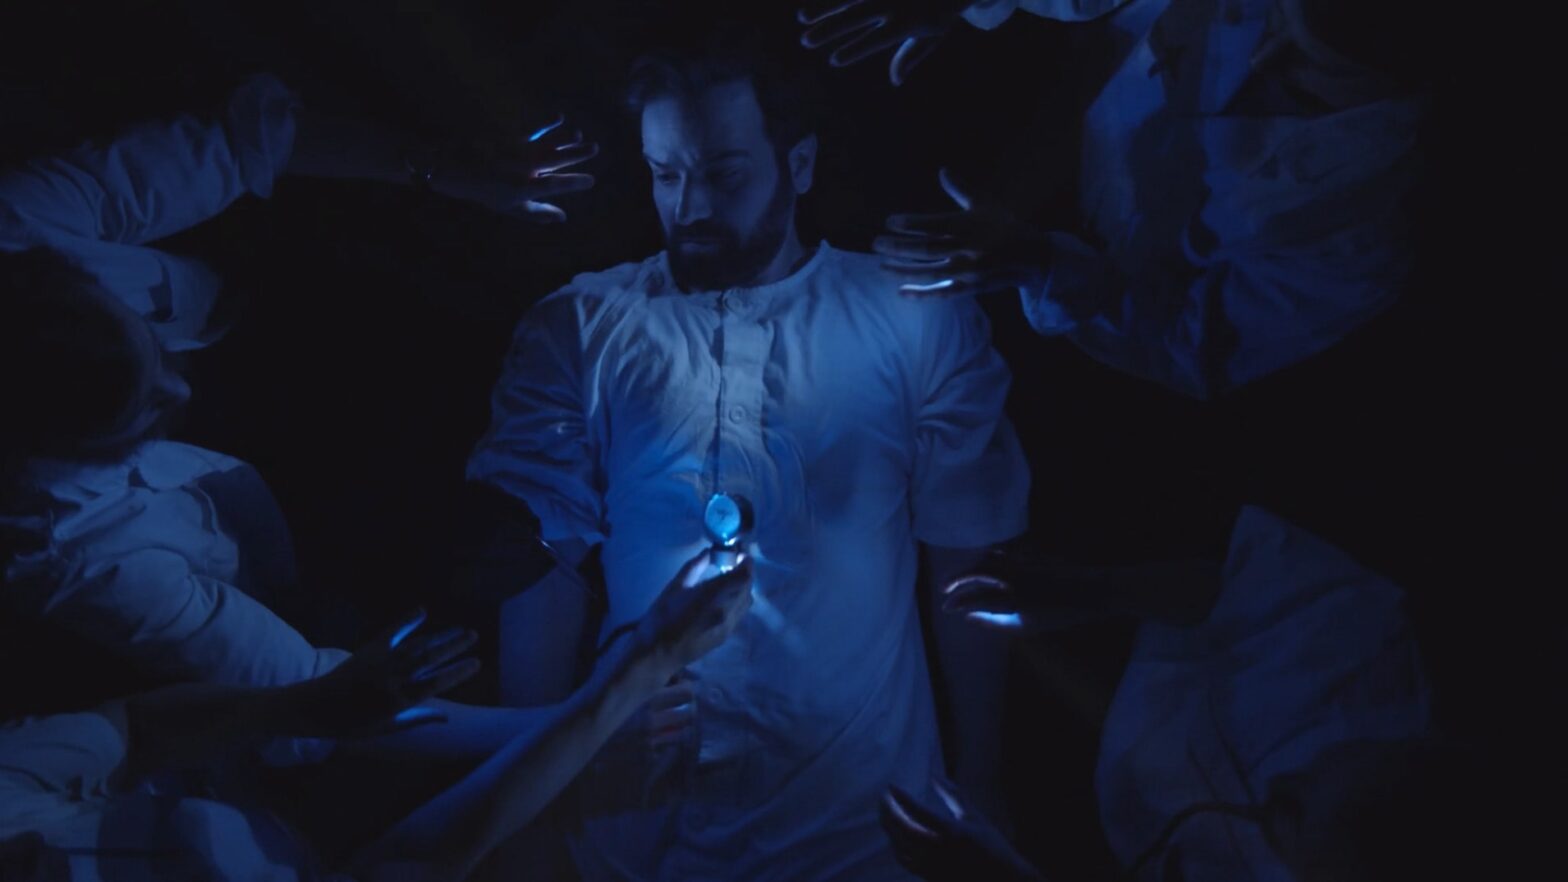 Man in hospital clothes in a dark environment with blue lights